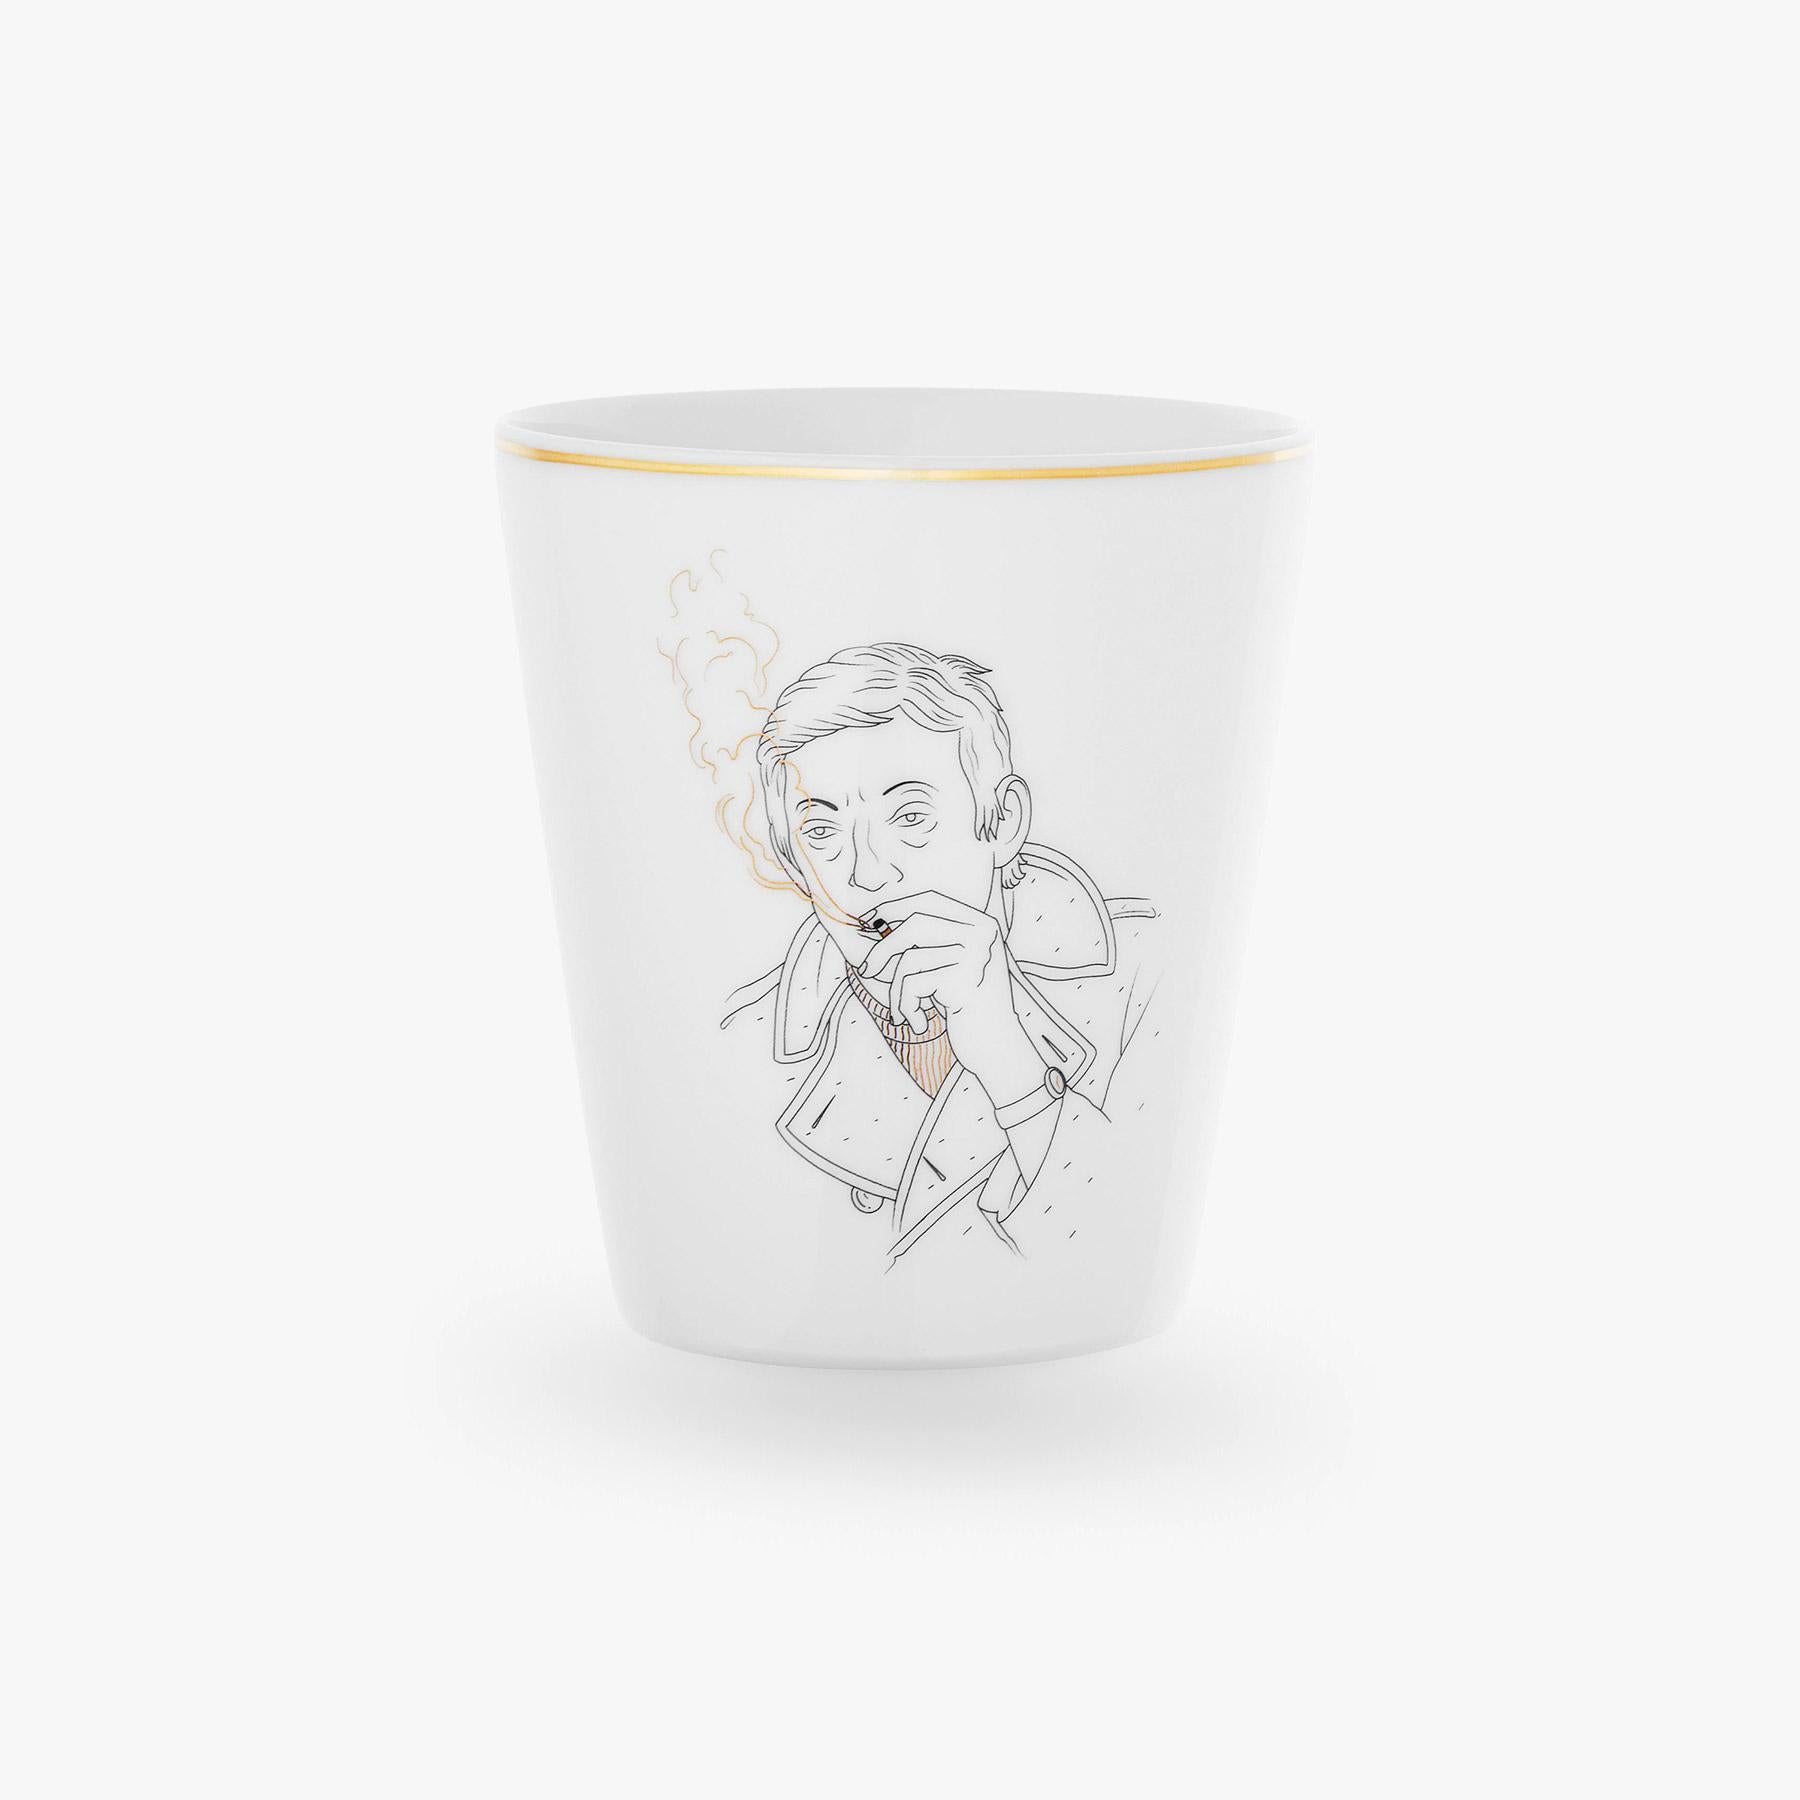 Maison Fragile and the Parisian illustrator artist Jean-Michel Tixier have joined together to create a collection that pays tribute to these men and women, key figures of history, who have made Paris as we know it.

Porcelain of Limoges extra